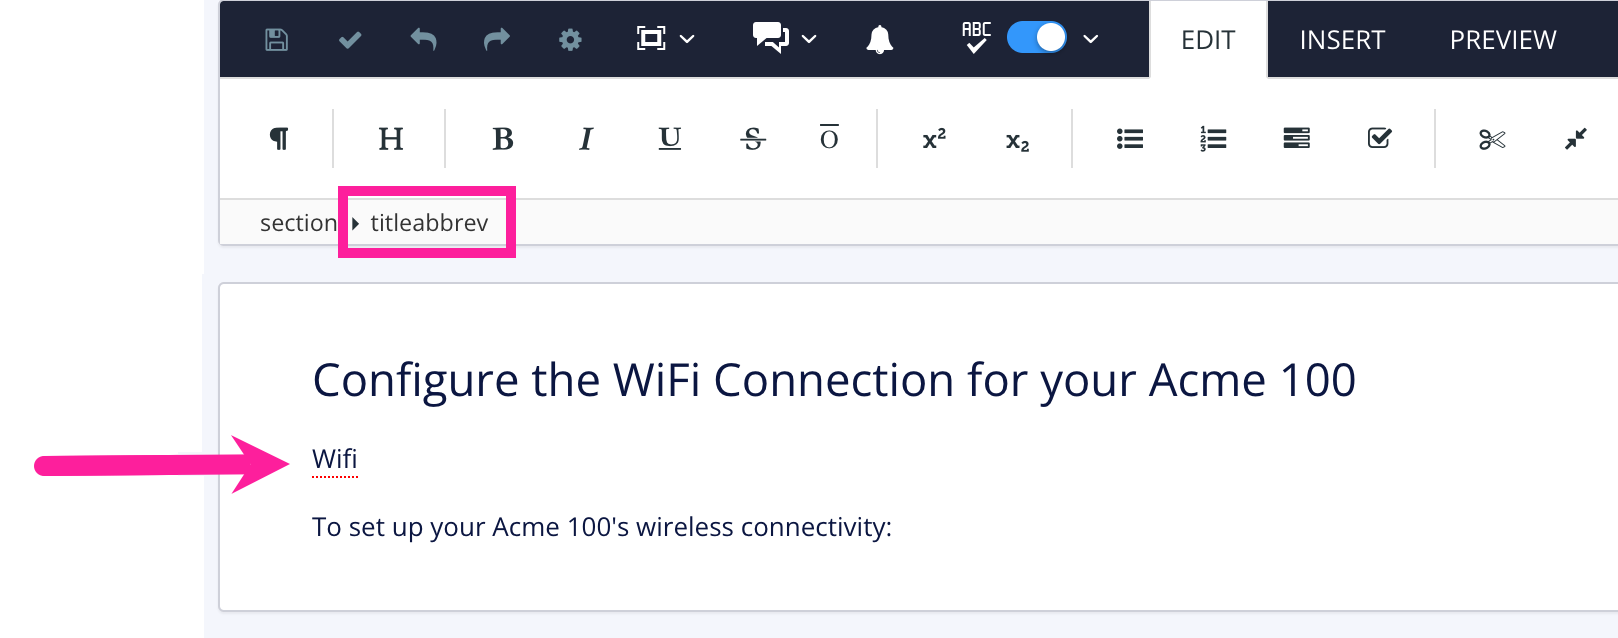 Topic showing "Configure the WiFi Connections for your ACME 100" as a title. A titleabbrev element has been added after the main title and before the first paragraph.